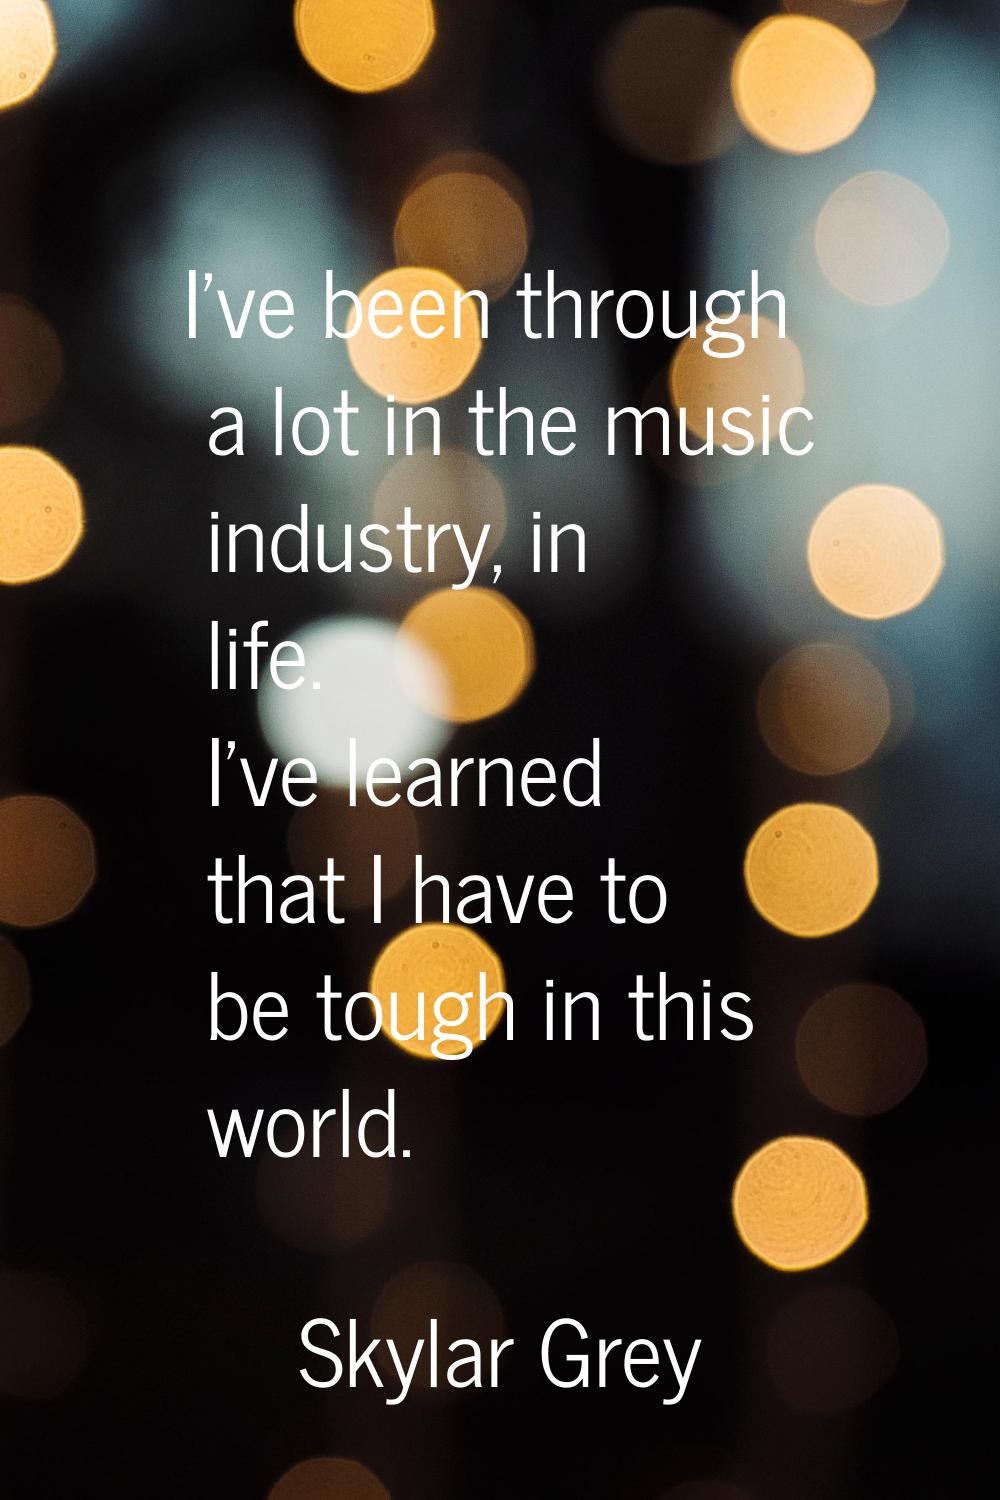 I've been through a lot in the music industry, in life. I've learned that I have to be tough in thi